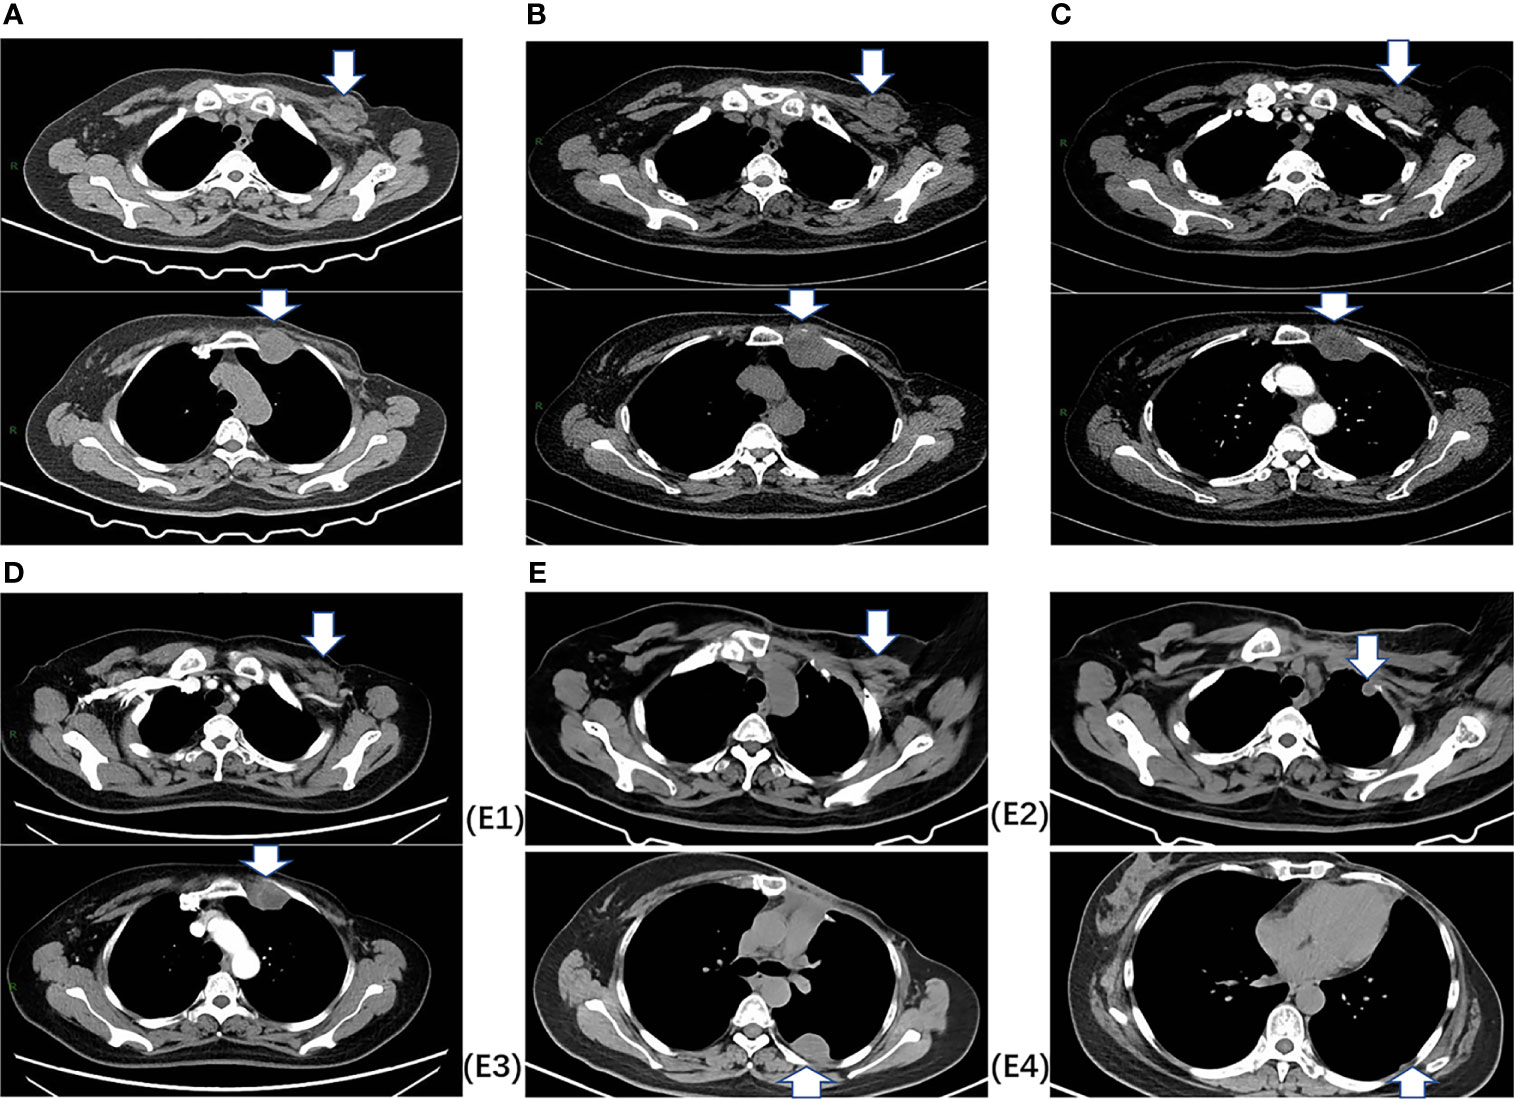 An 80-year-old woman with local chest wall recurrence of breast cancer